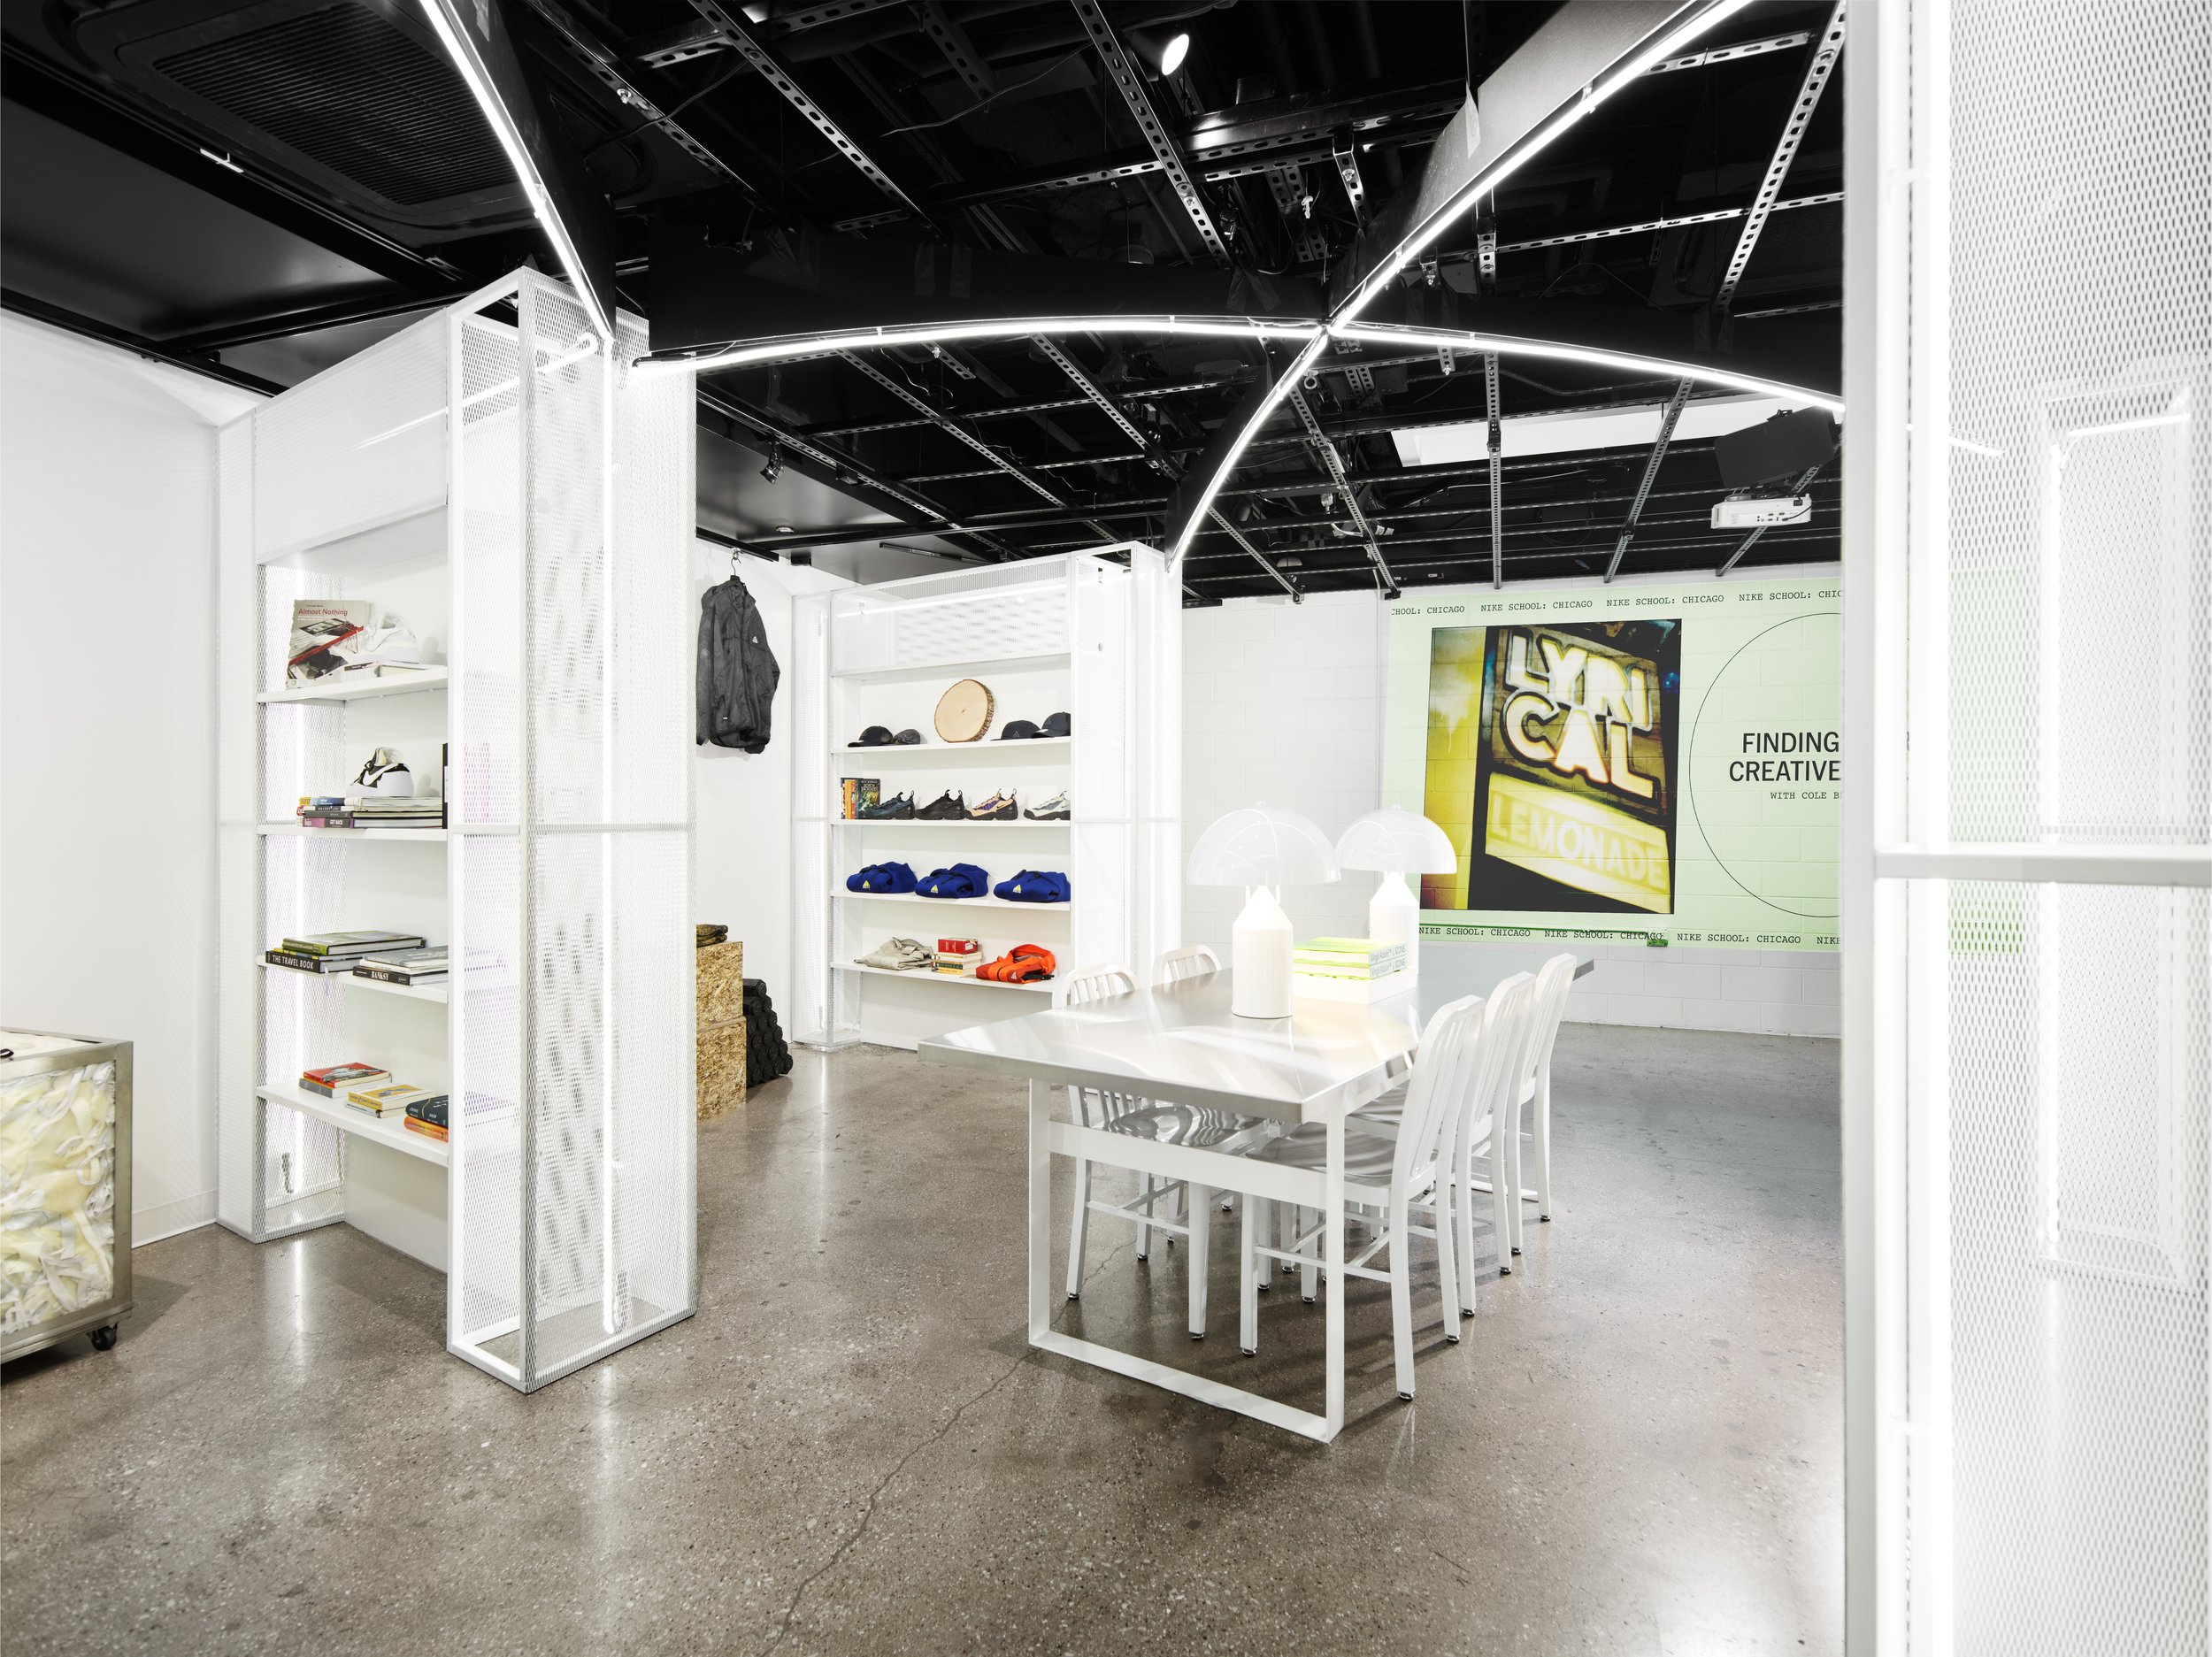  Nike Chicago retail interior architecture photography. Design by  Future Firm  